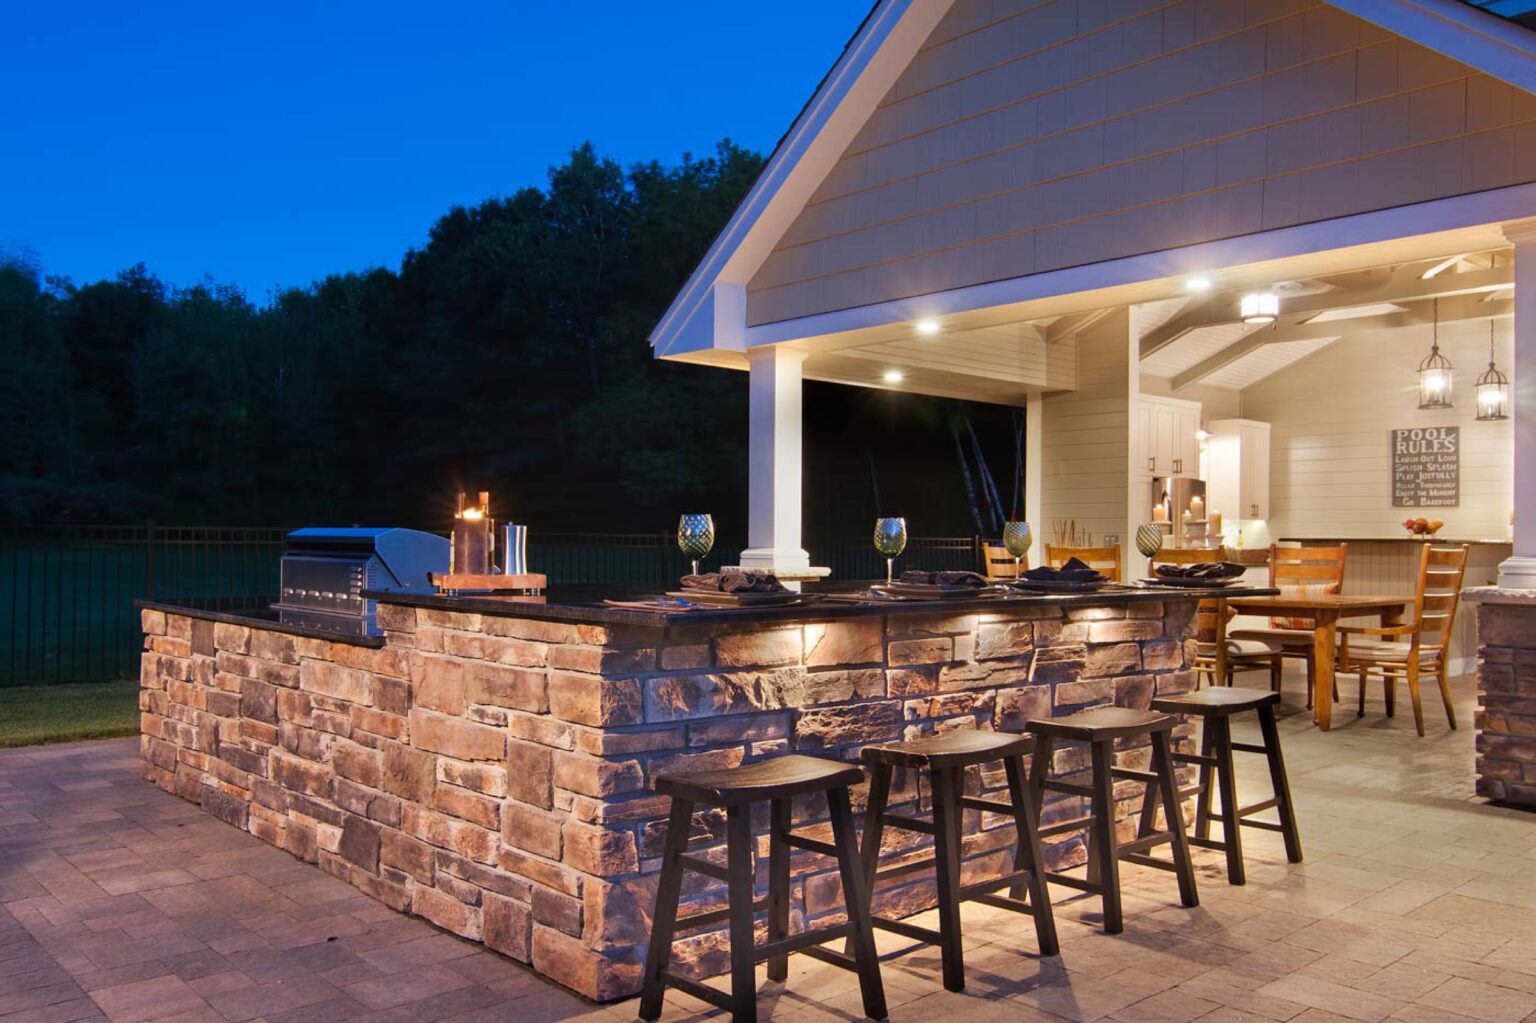 Blended indoor and outdoor living space with a grill and bar seating against a night sky. 